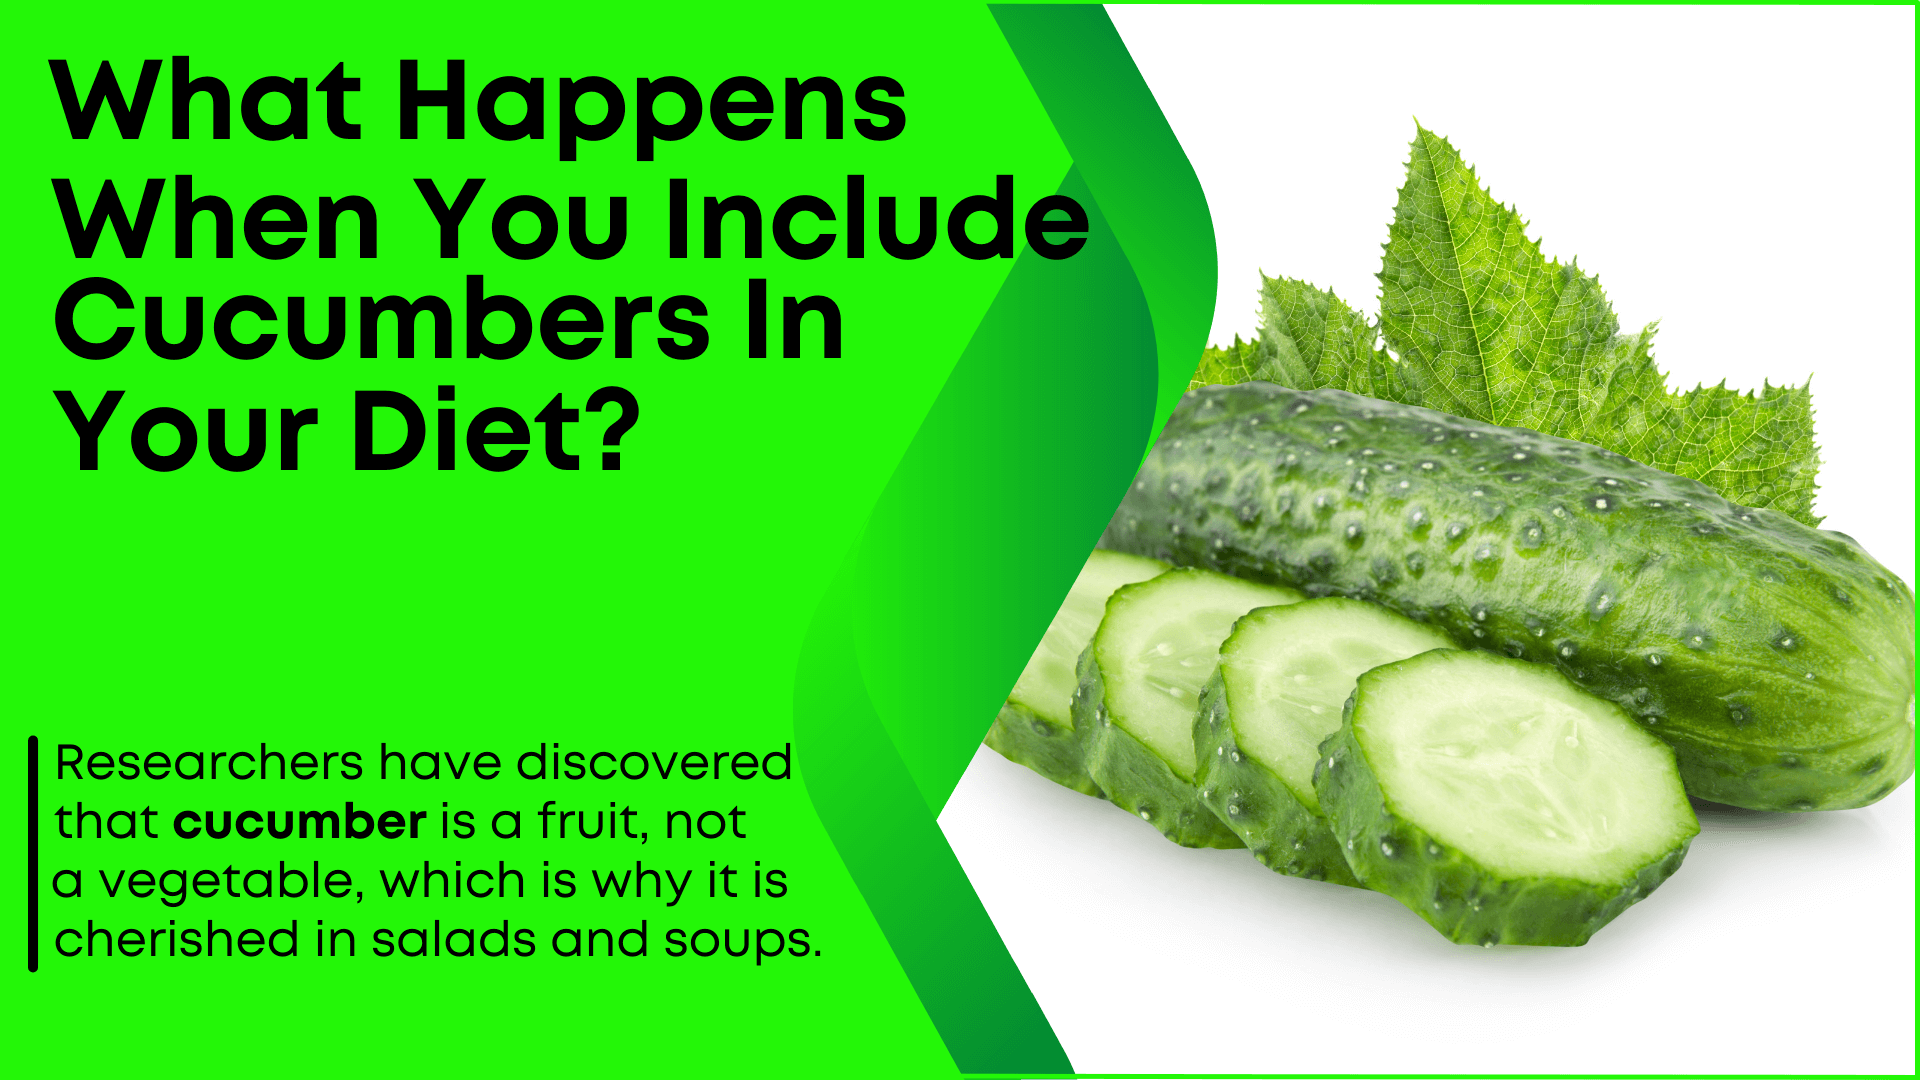 What Happens When You Include Cucumbers In Your Diet